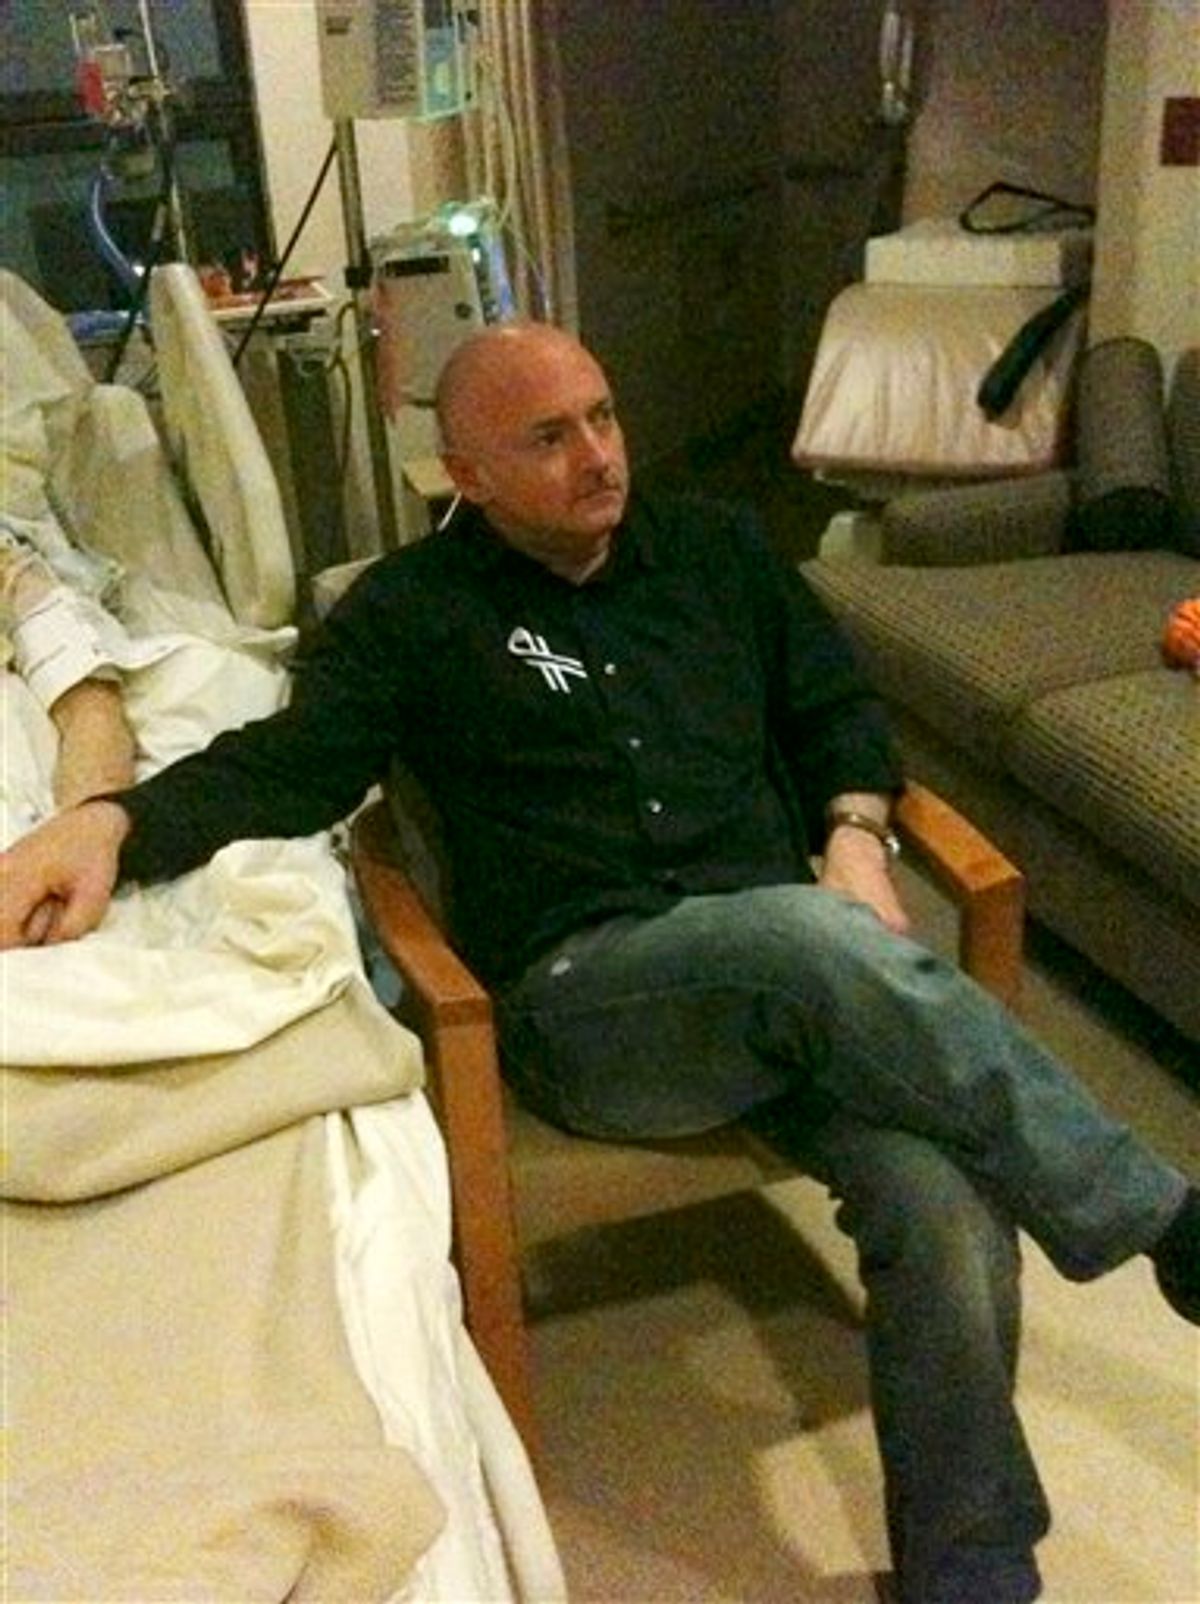 A photo released by the office of U.S. Rep. Gabrielle Giffords shows Rep. Giffords husband Mark Kelly watching the State of The Union speech while holding his wife's hand in her hospital room in Houston Tuesday  Jan. 25, 2010.  (AP Photo) (AP)